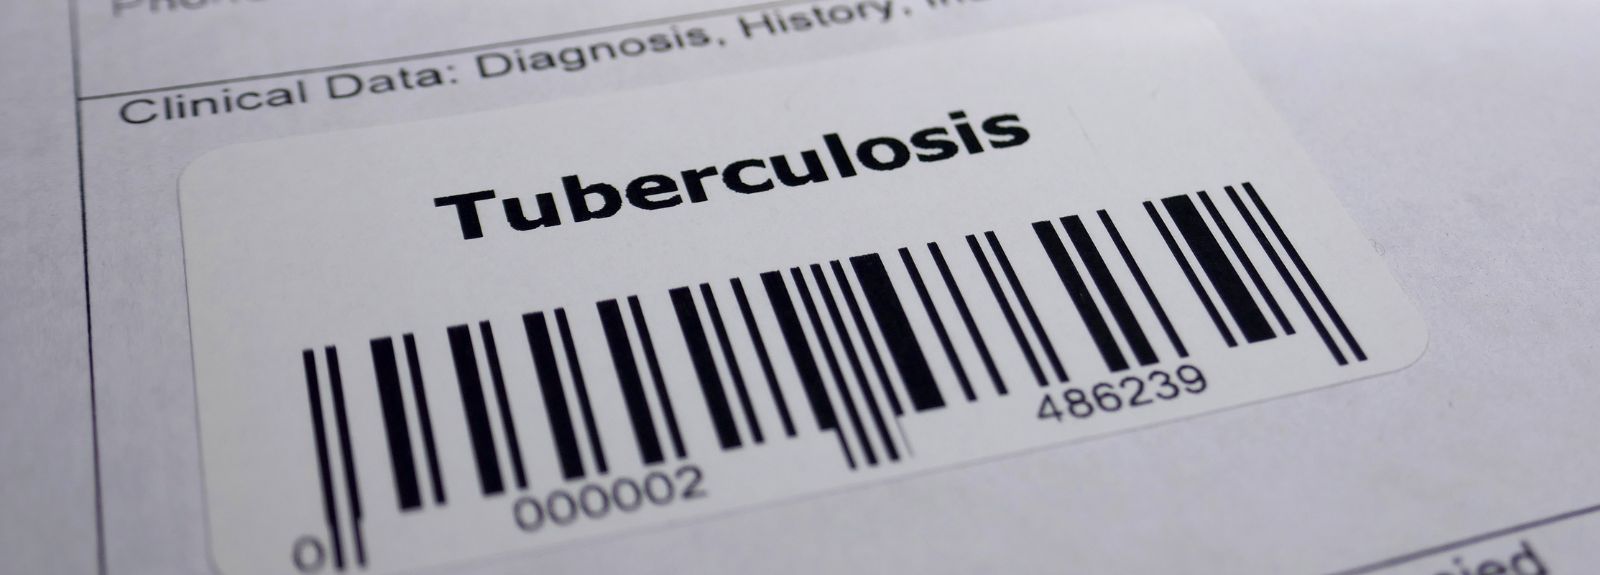 Tuberculosis test barcode label